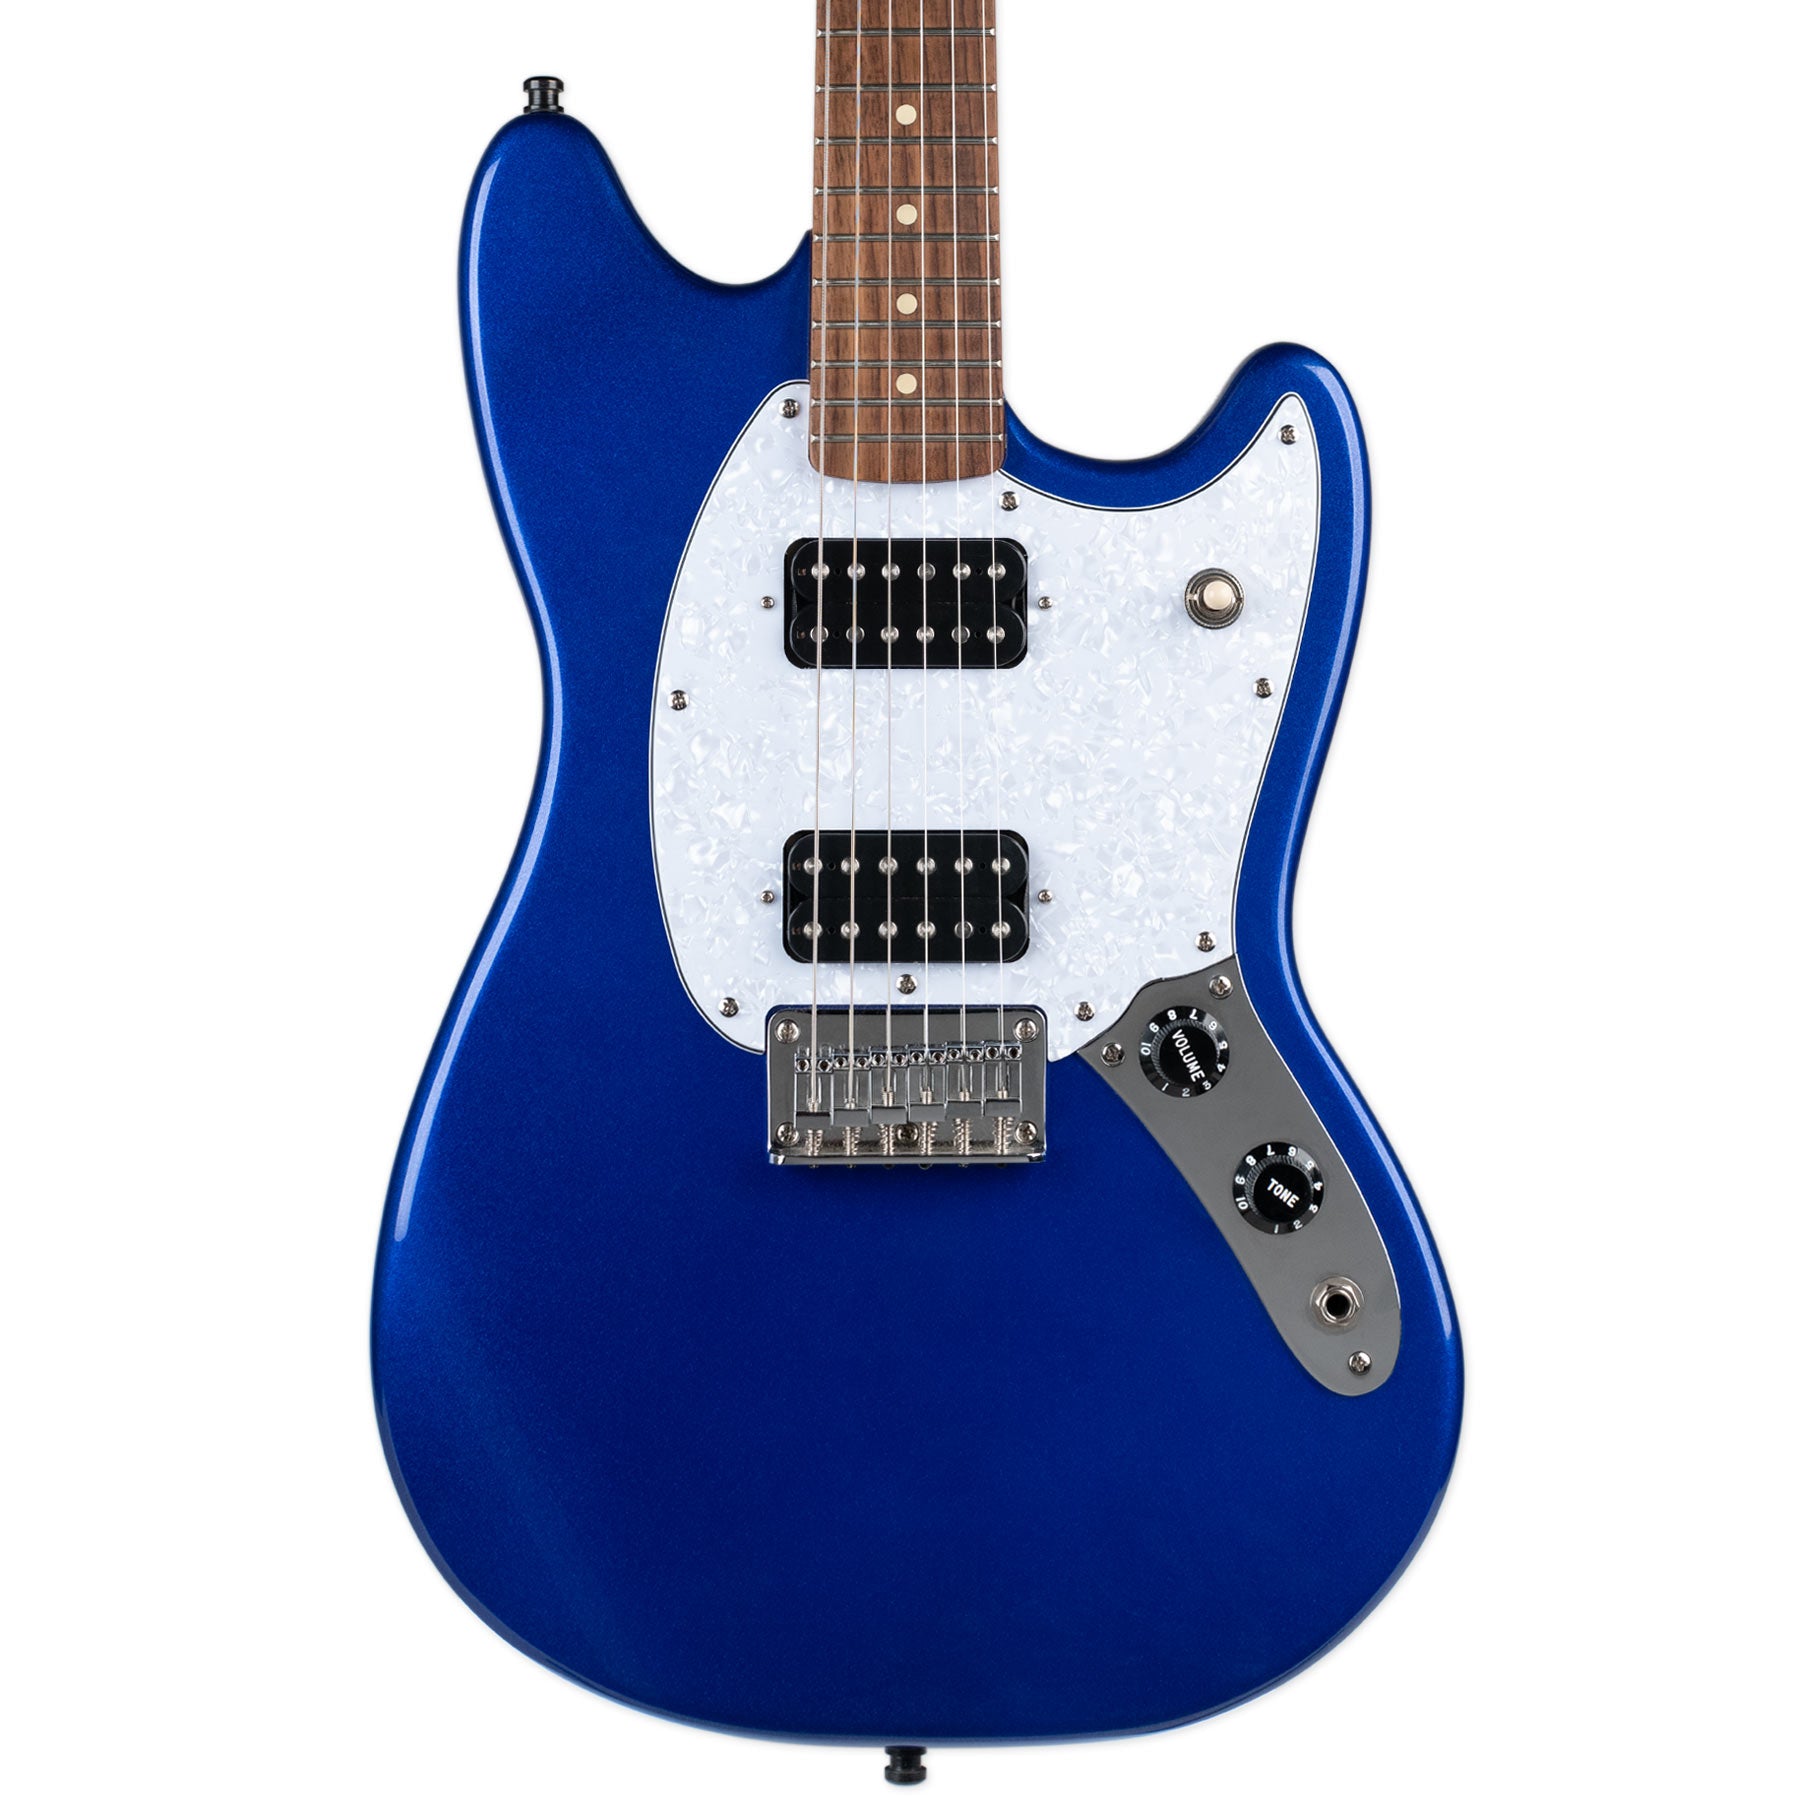 USED SQUIER BULLET MUSTANG HH - IMPERIAL BLUE WITH LOCKING TUNERS AND STRAP LOCKS